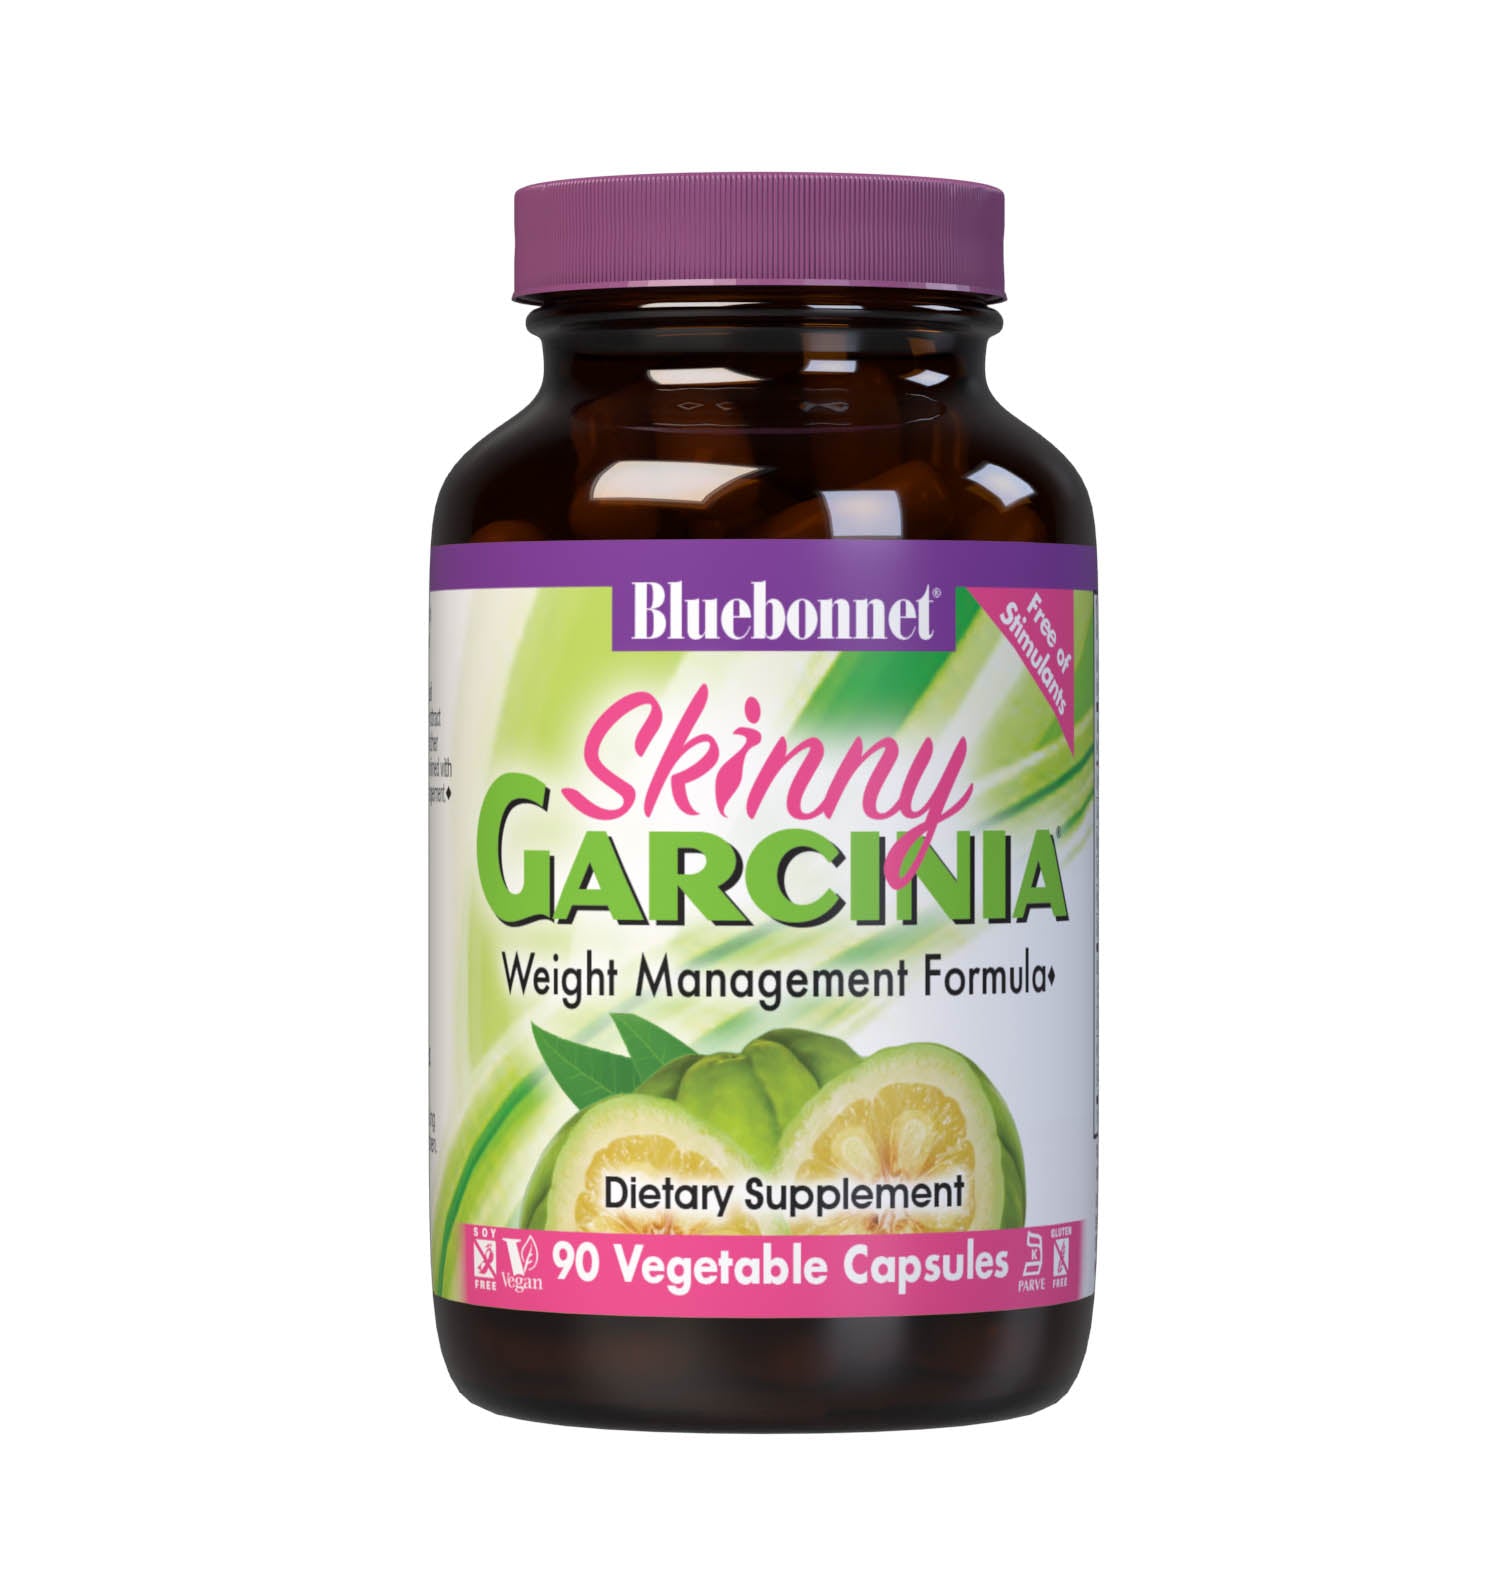 Bluebonnet’s Skinny Garcinia 90 Vegetable Capsules are specially formulated with the patented South Asian fruit extract, Garcinia cambogia, known as Super CitriMax that is standardized to 60% [750 mg] hydroxycitric acid (HCA). When combined with proper diet and exercise, this caffeine-free, non-stimulant formula may help support healthy weight management by burning fat, supporting healthy blood sugar levels already within normal range, and curbing appetite. #size_90 count